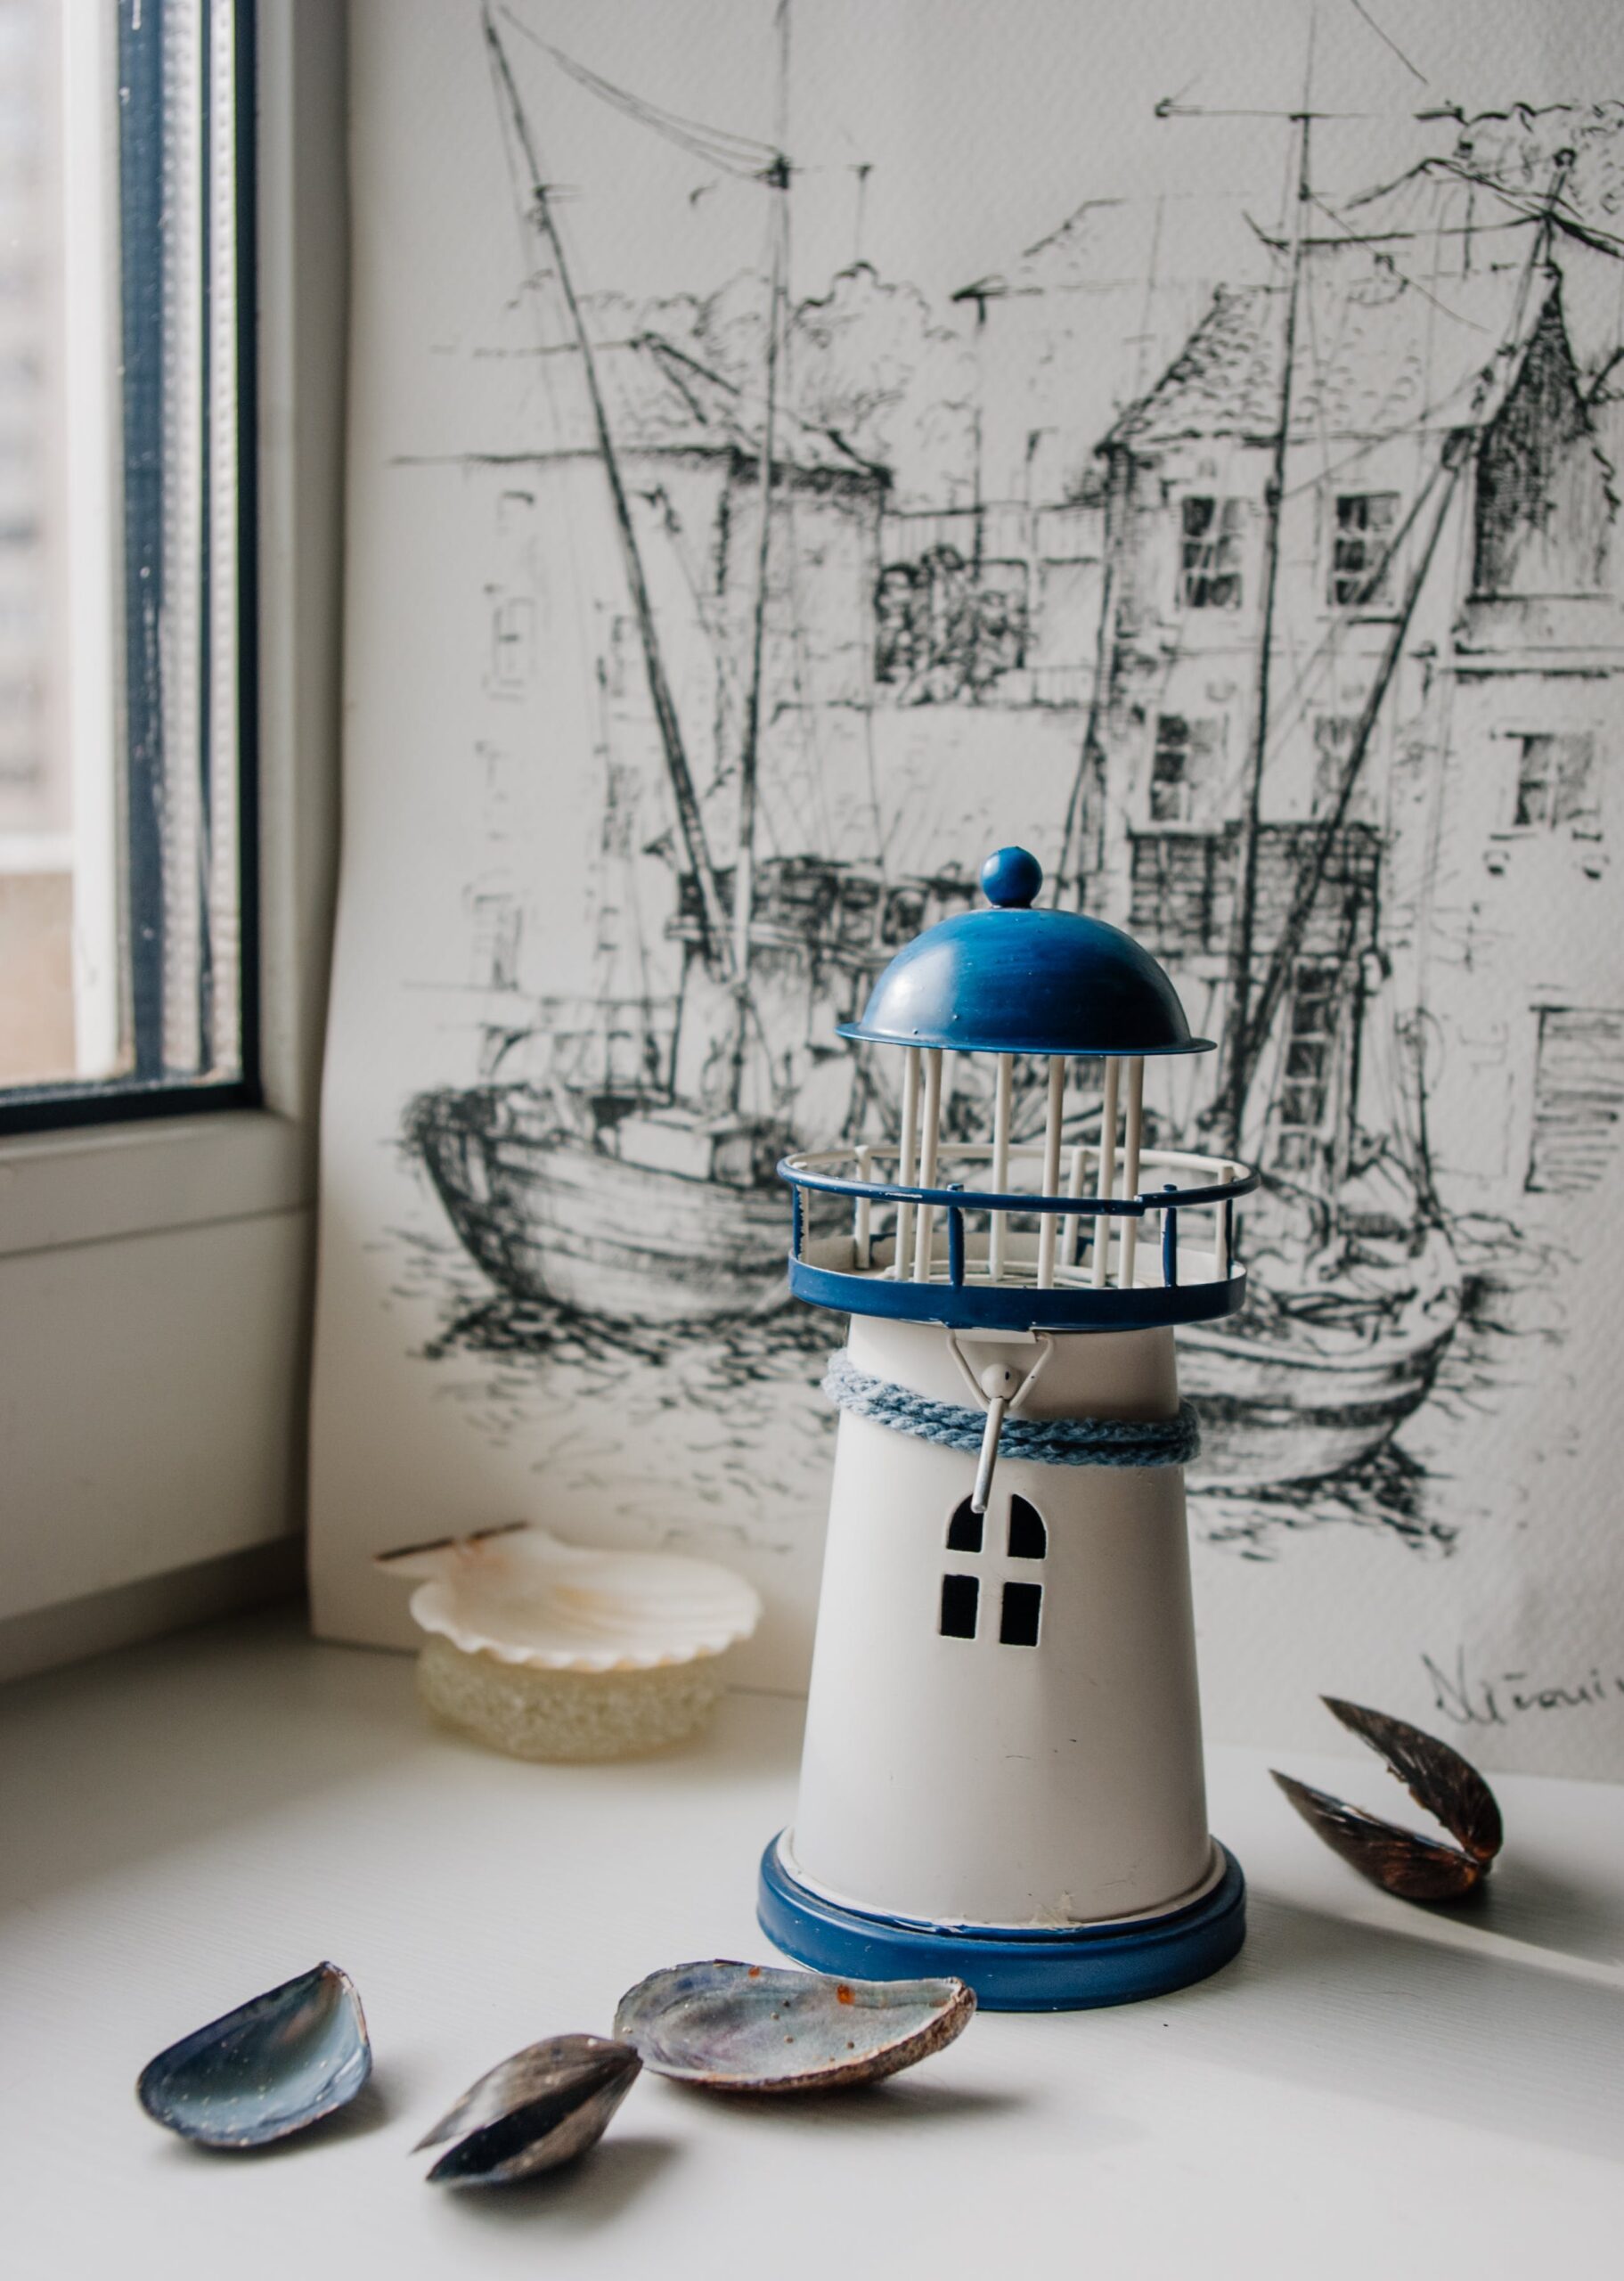 Nautical lighthouse toy with pencil sketch arranged on table